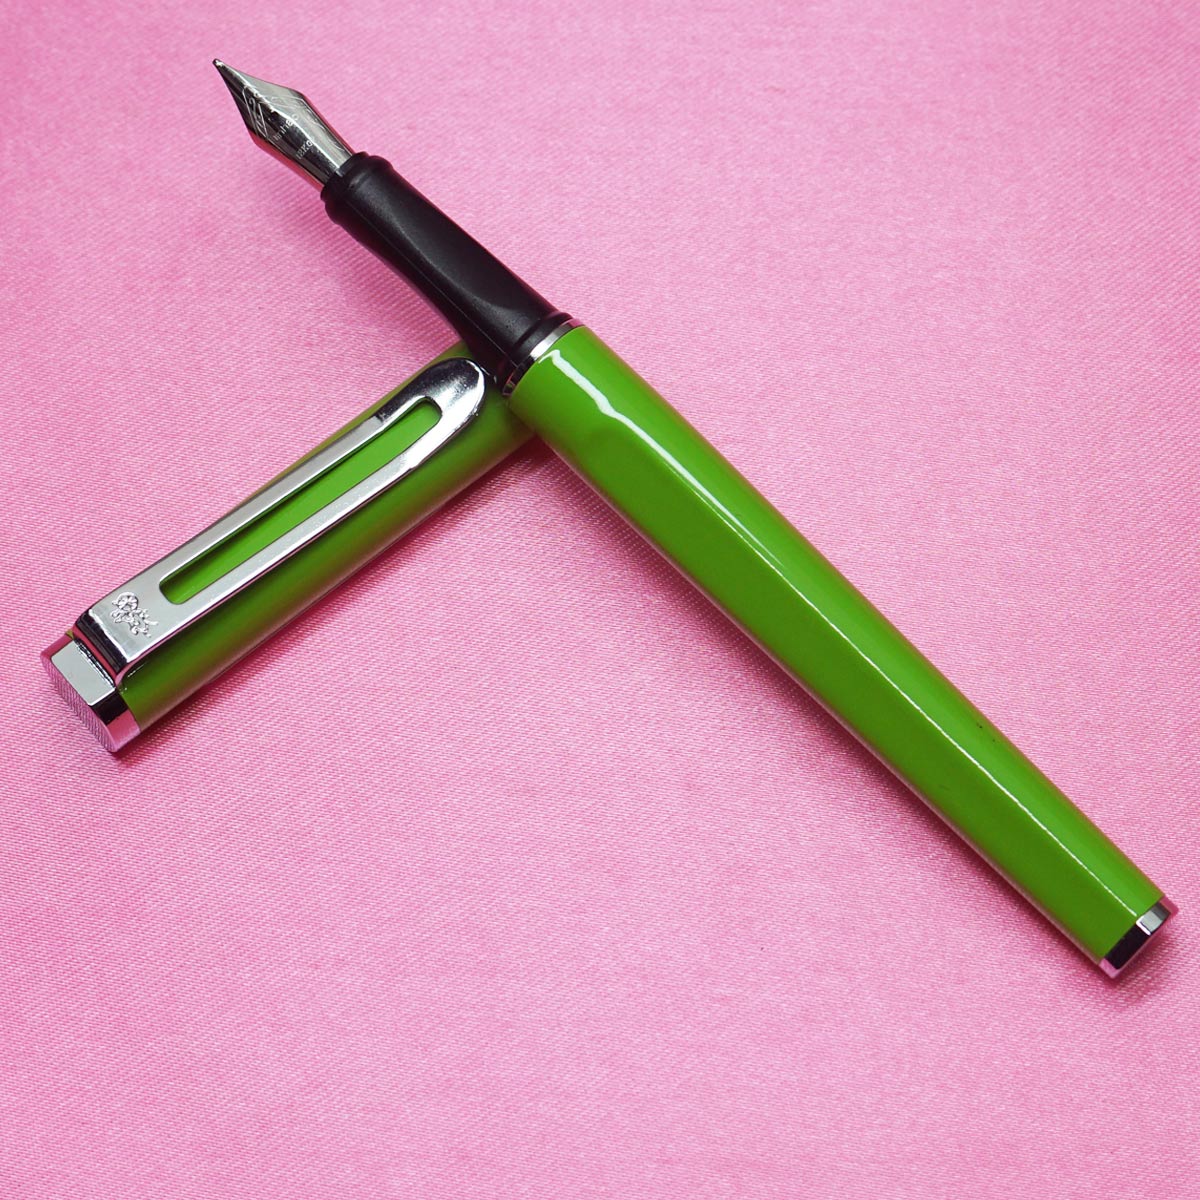 Jinhao 799 Green Color Body and Cap with Silver Trim Convertor Type Fountain pen SKU 22299